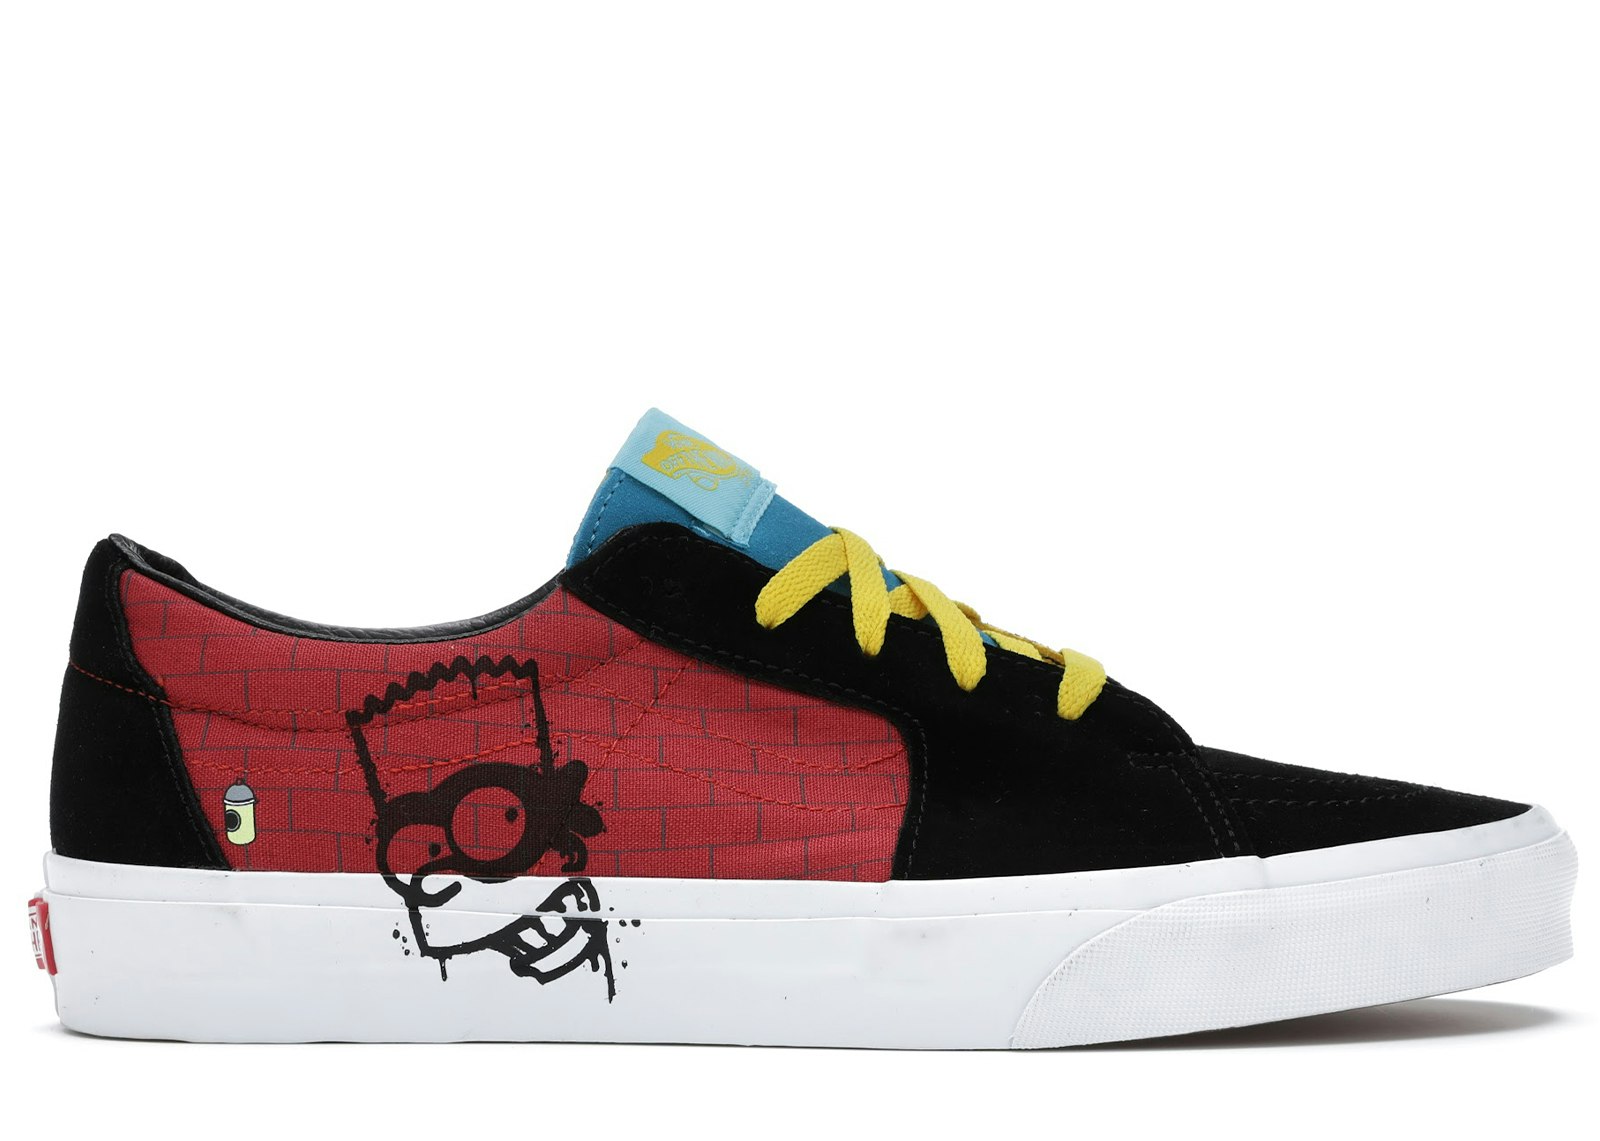 Details about   Vans x The Simpsons Kids El Barto Old Skool Junior Shoes VN0A4BUU17A 